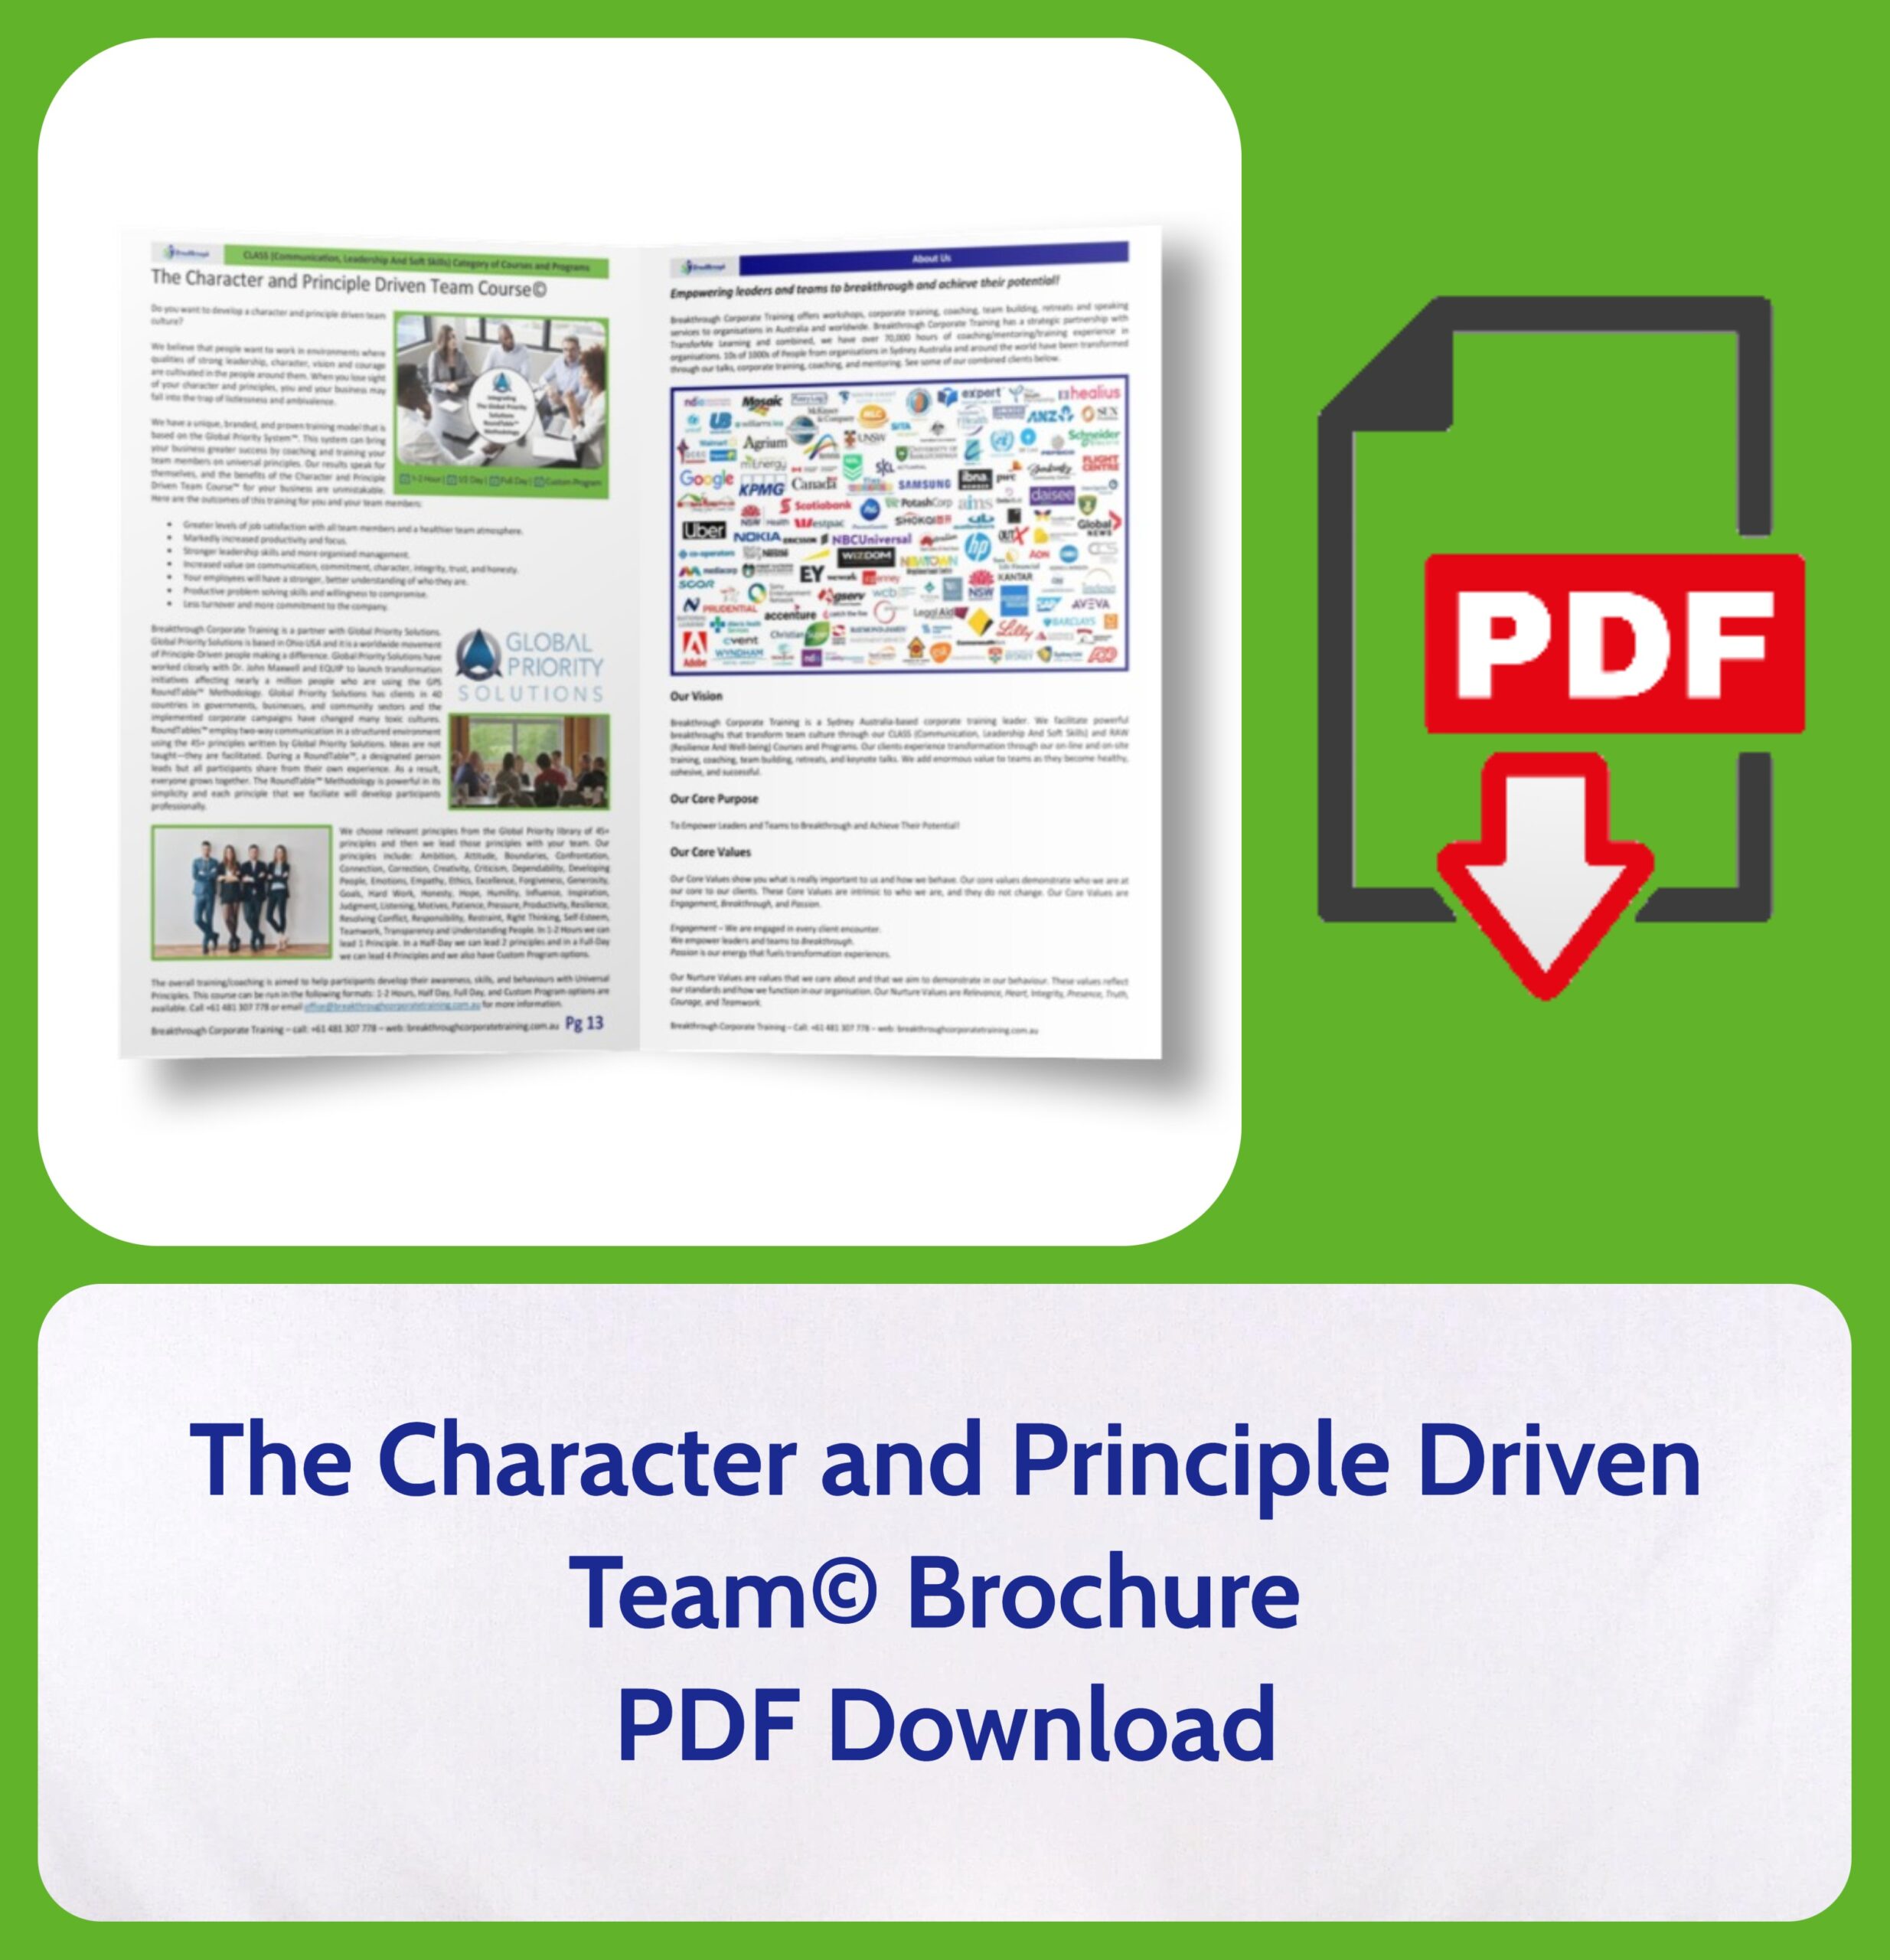 The Character and Principle Driven Team